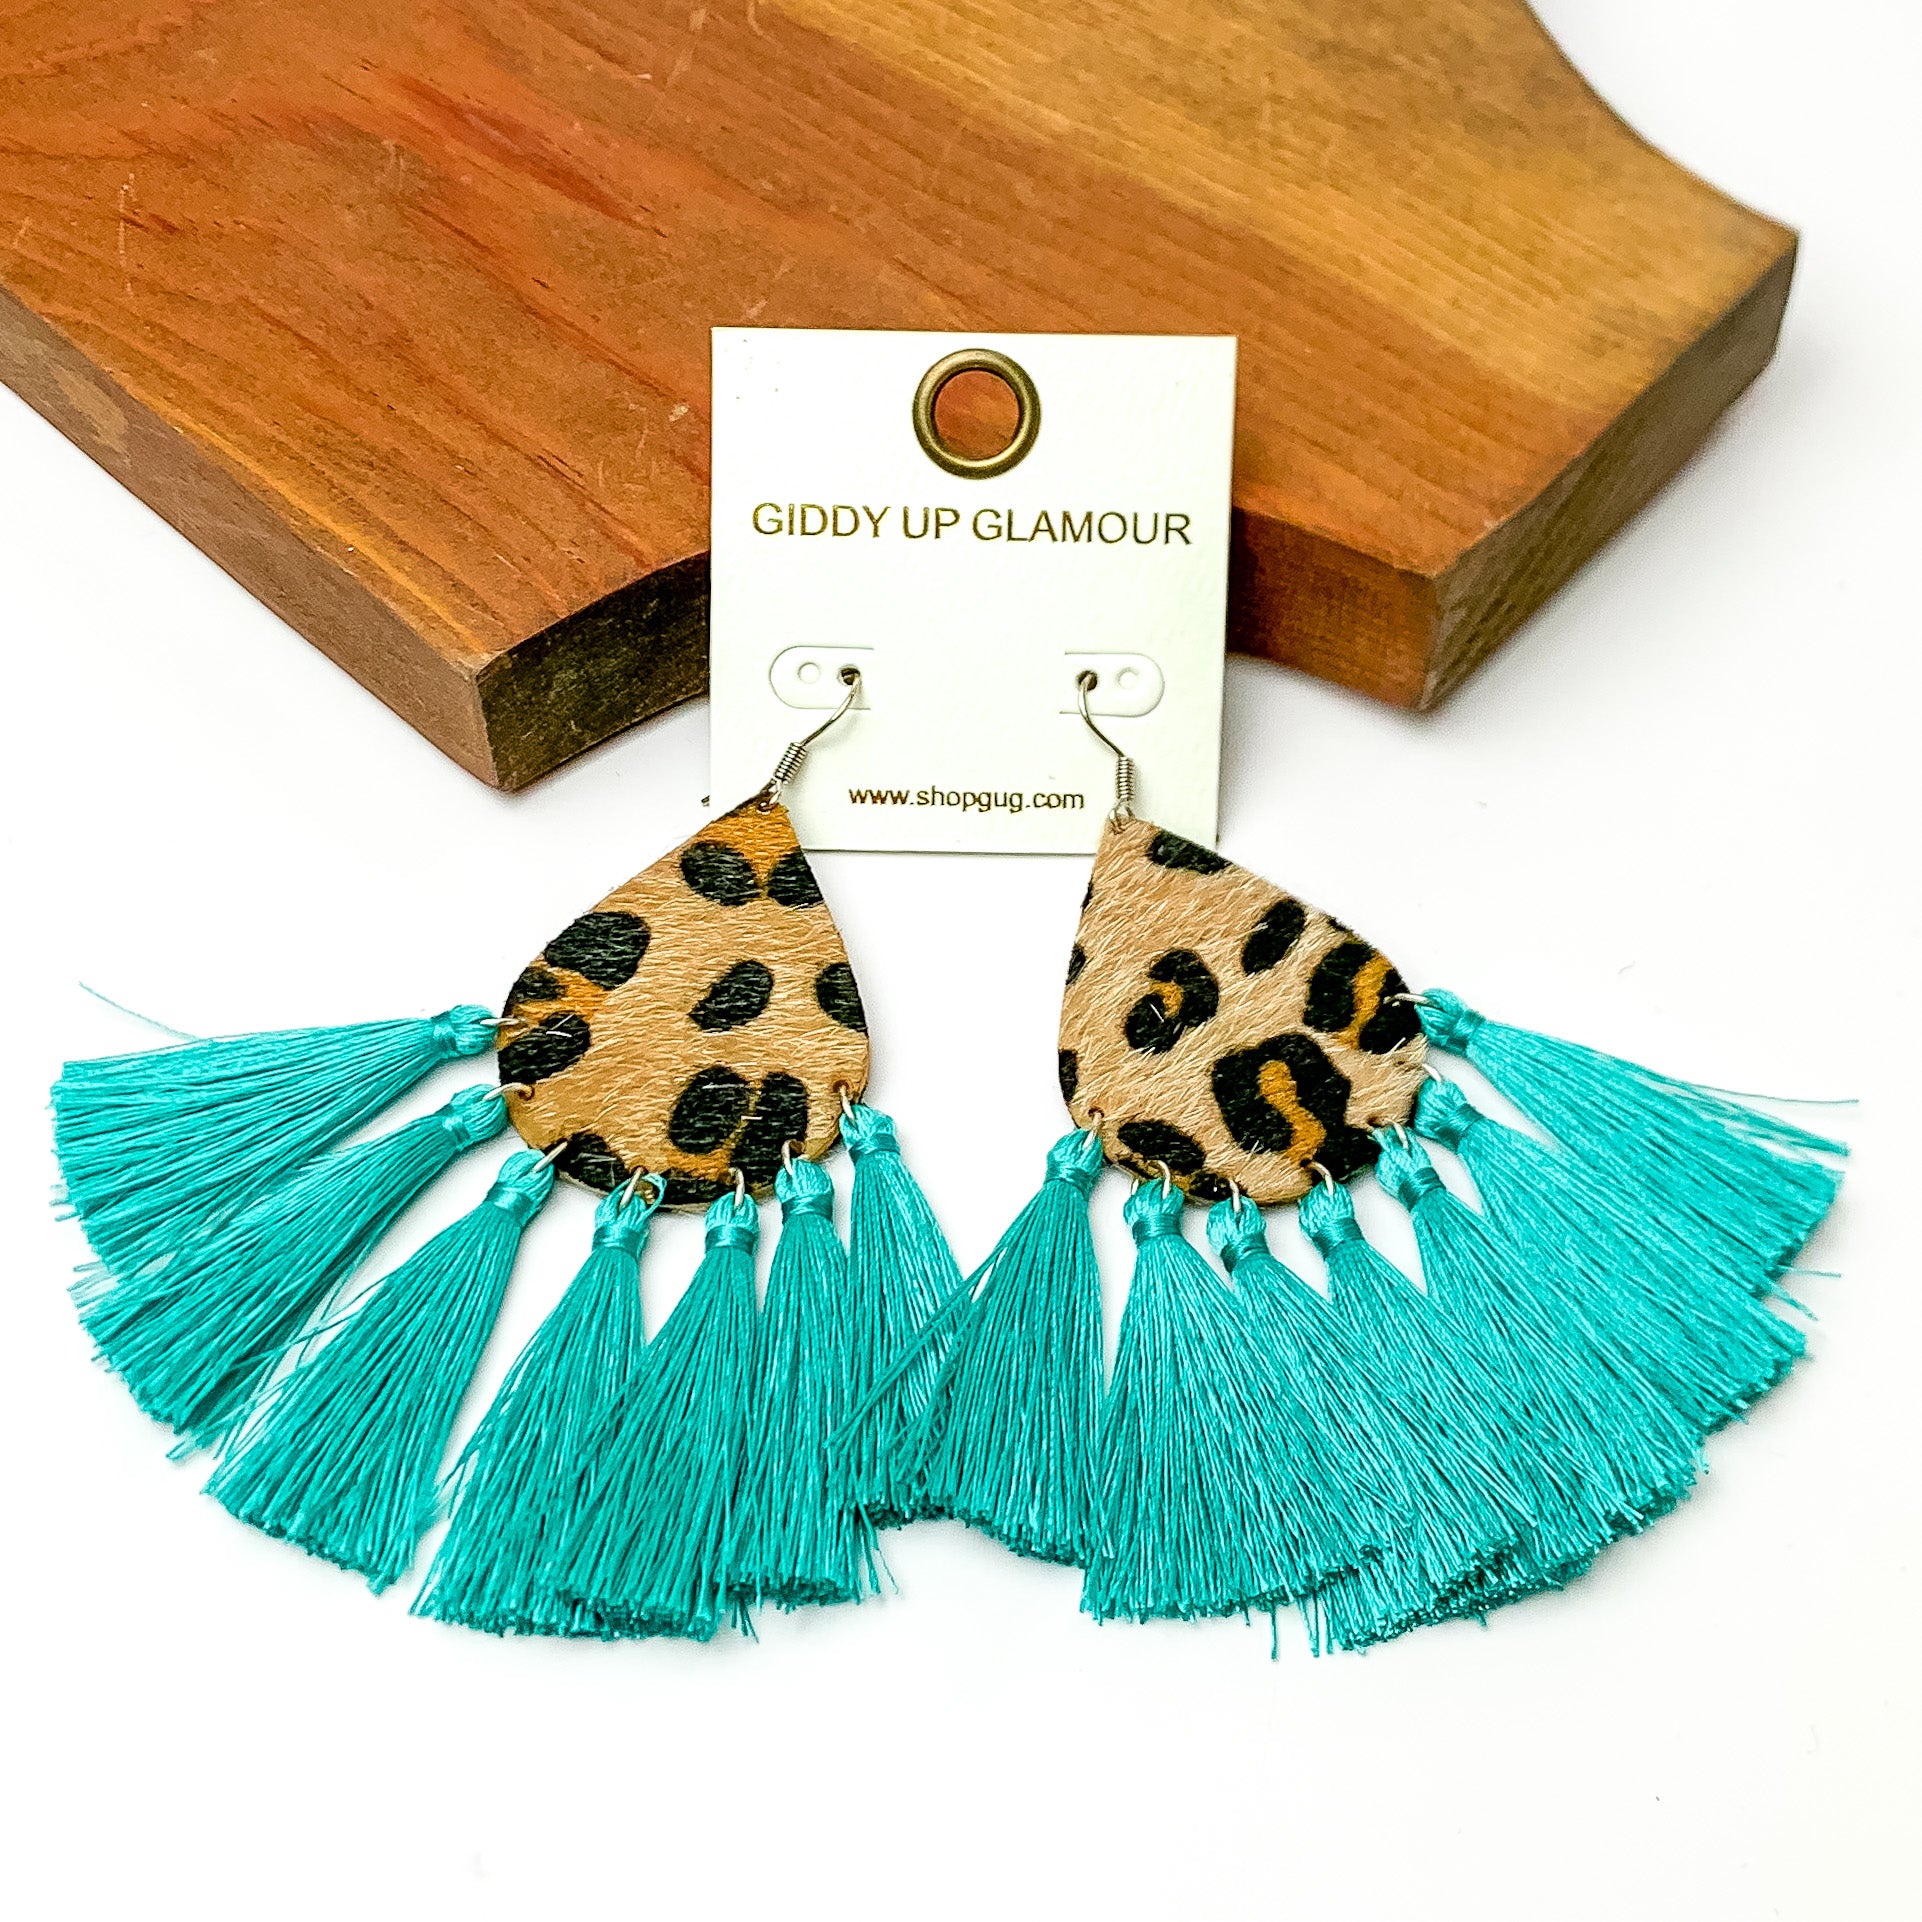 Leopard print drop earrings with turquoise tassels. Pictured on a white background with a wood piece at the top.